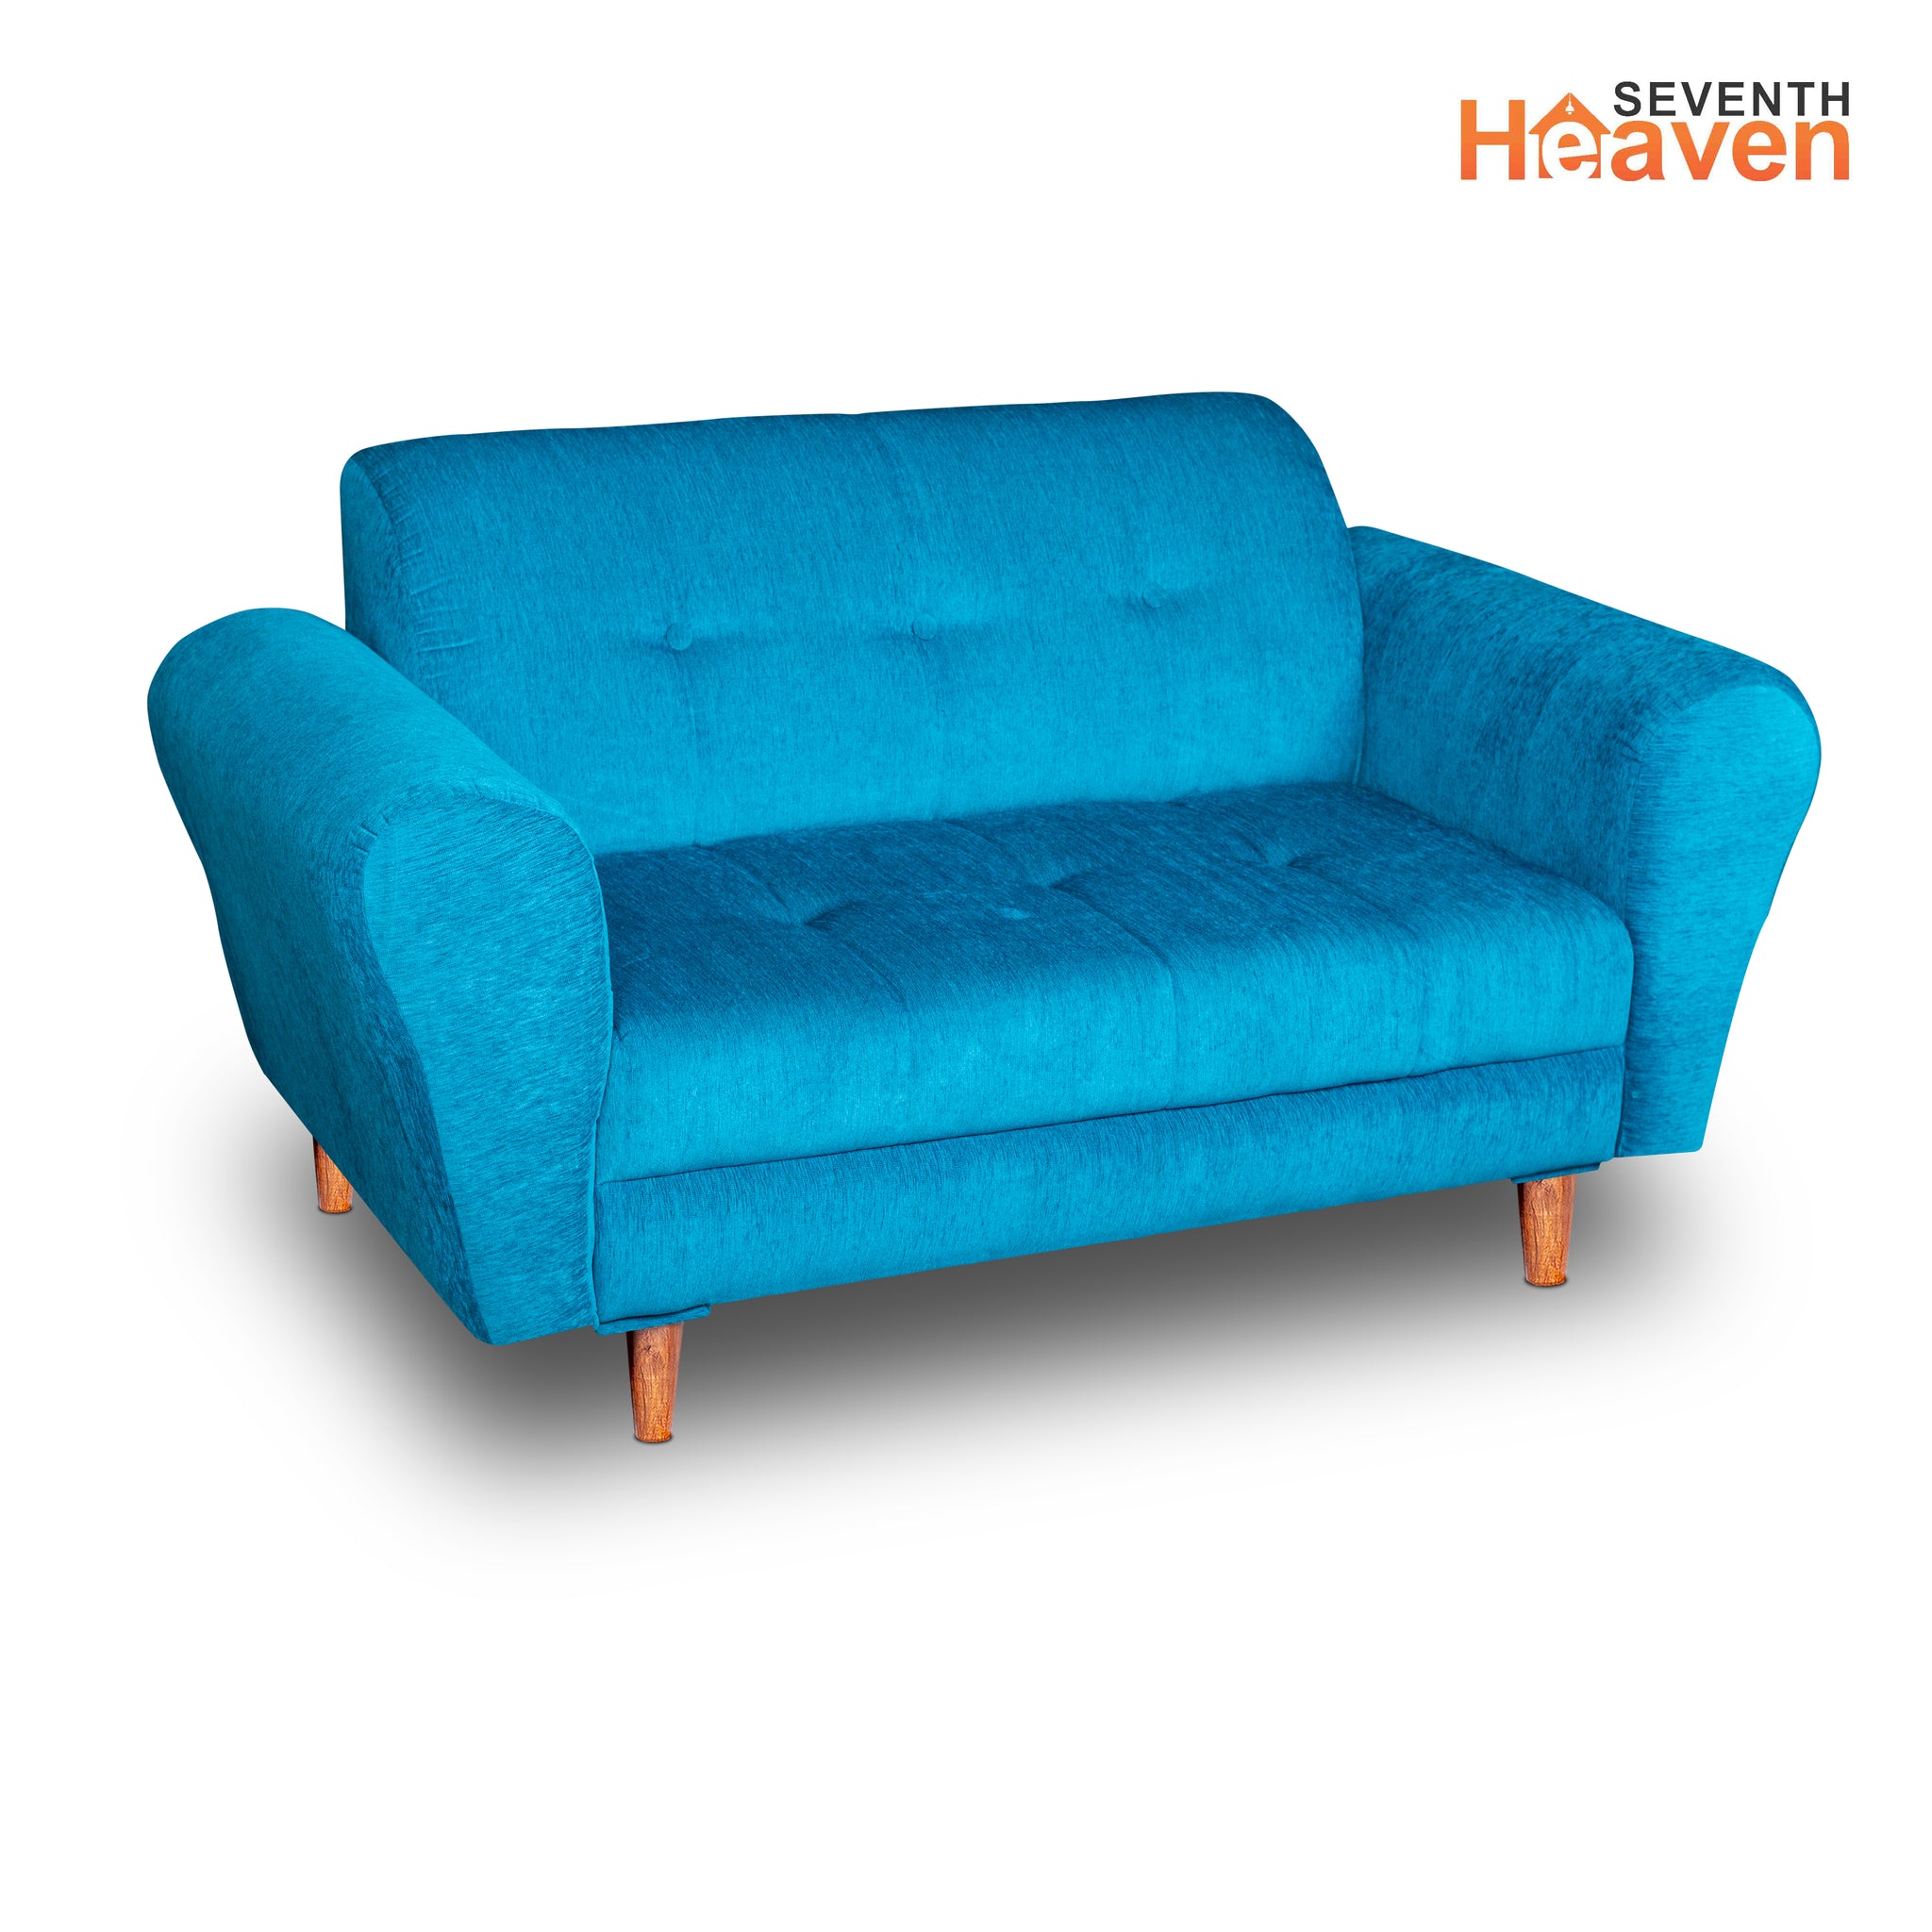 Seventh Heaven Milan 2 Seater Wooden Sofa Set Modern & Elegant Smart Furniture Range for luxurious homes, living rooms and offices. Sky Blue Colour Molphino fabric with sheesham polished wooden legs.